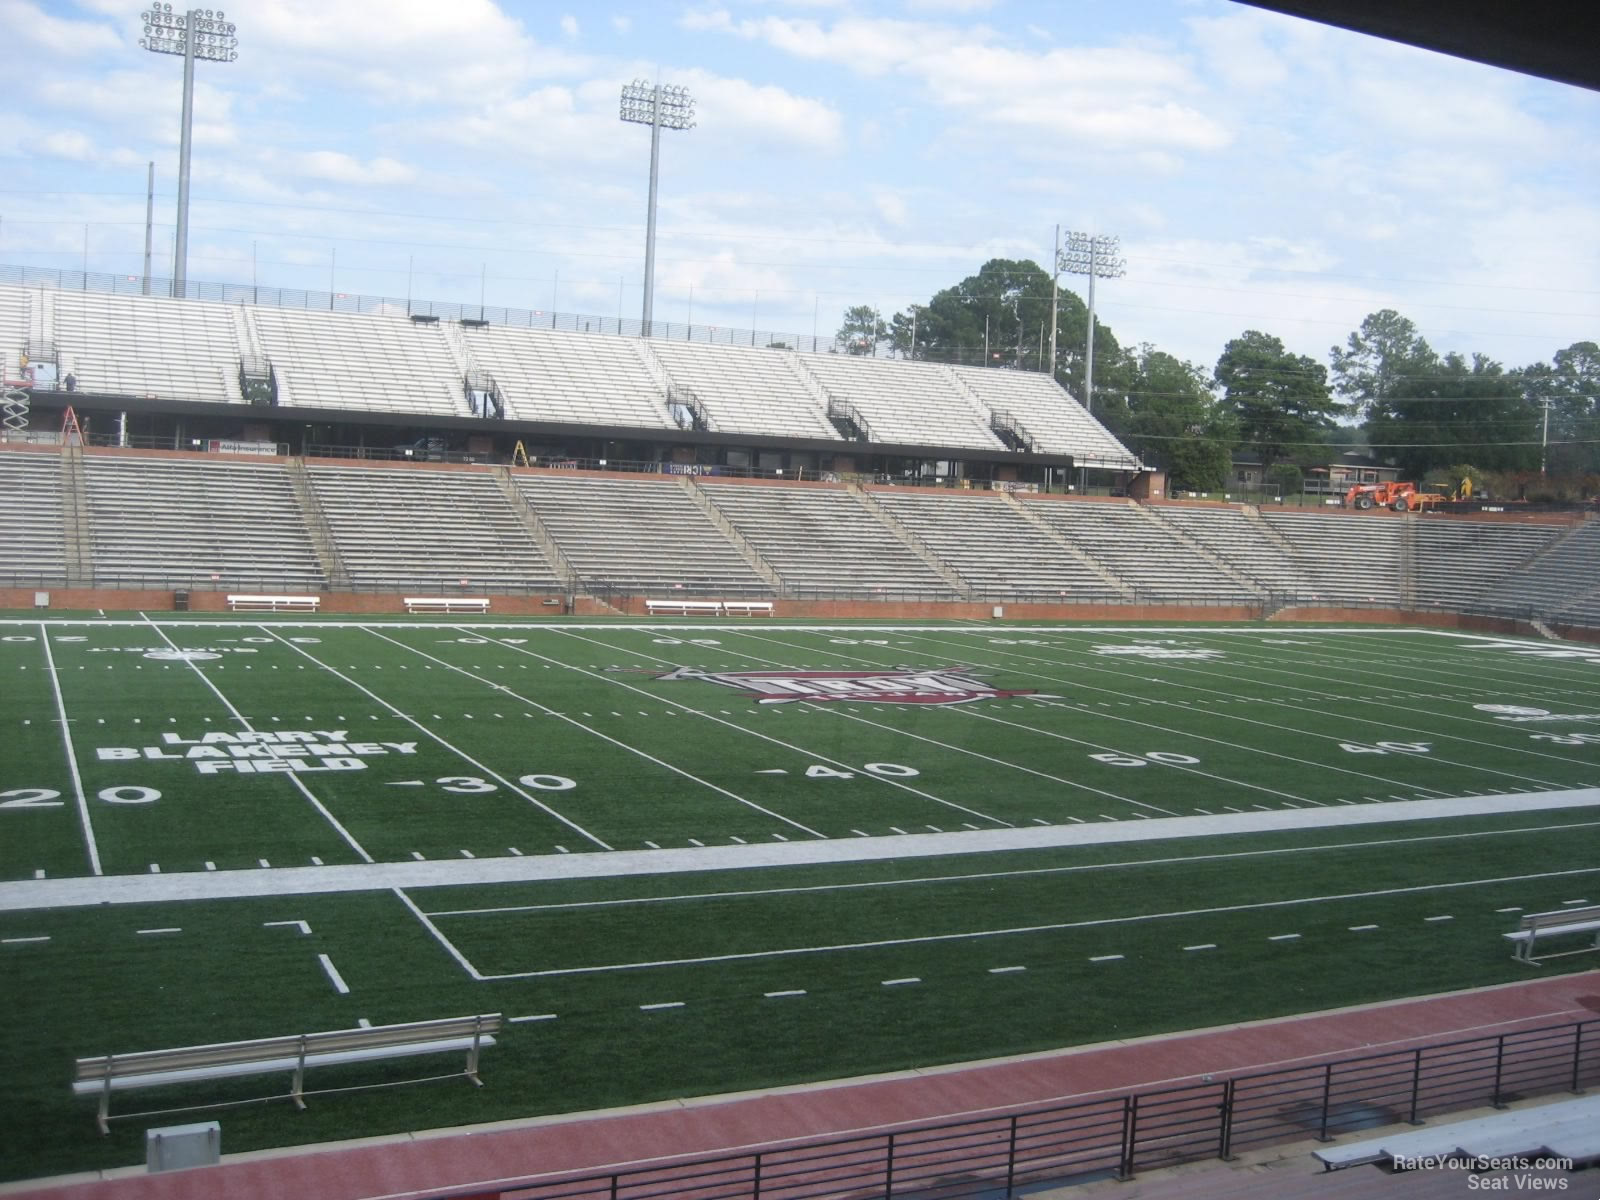 section 104, row 15 seat view  - troy memorial stadium